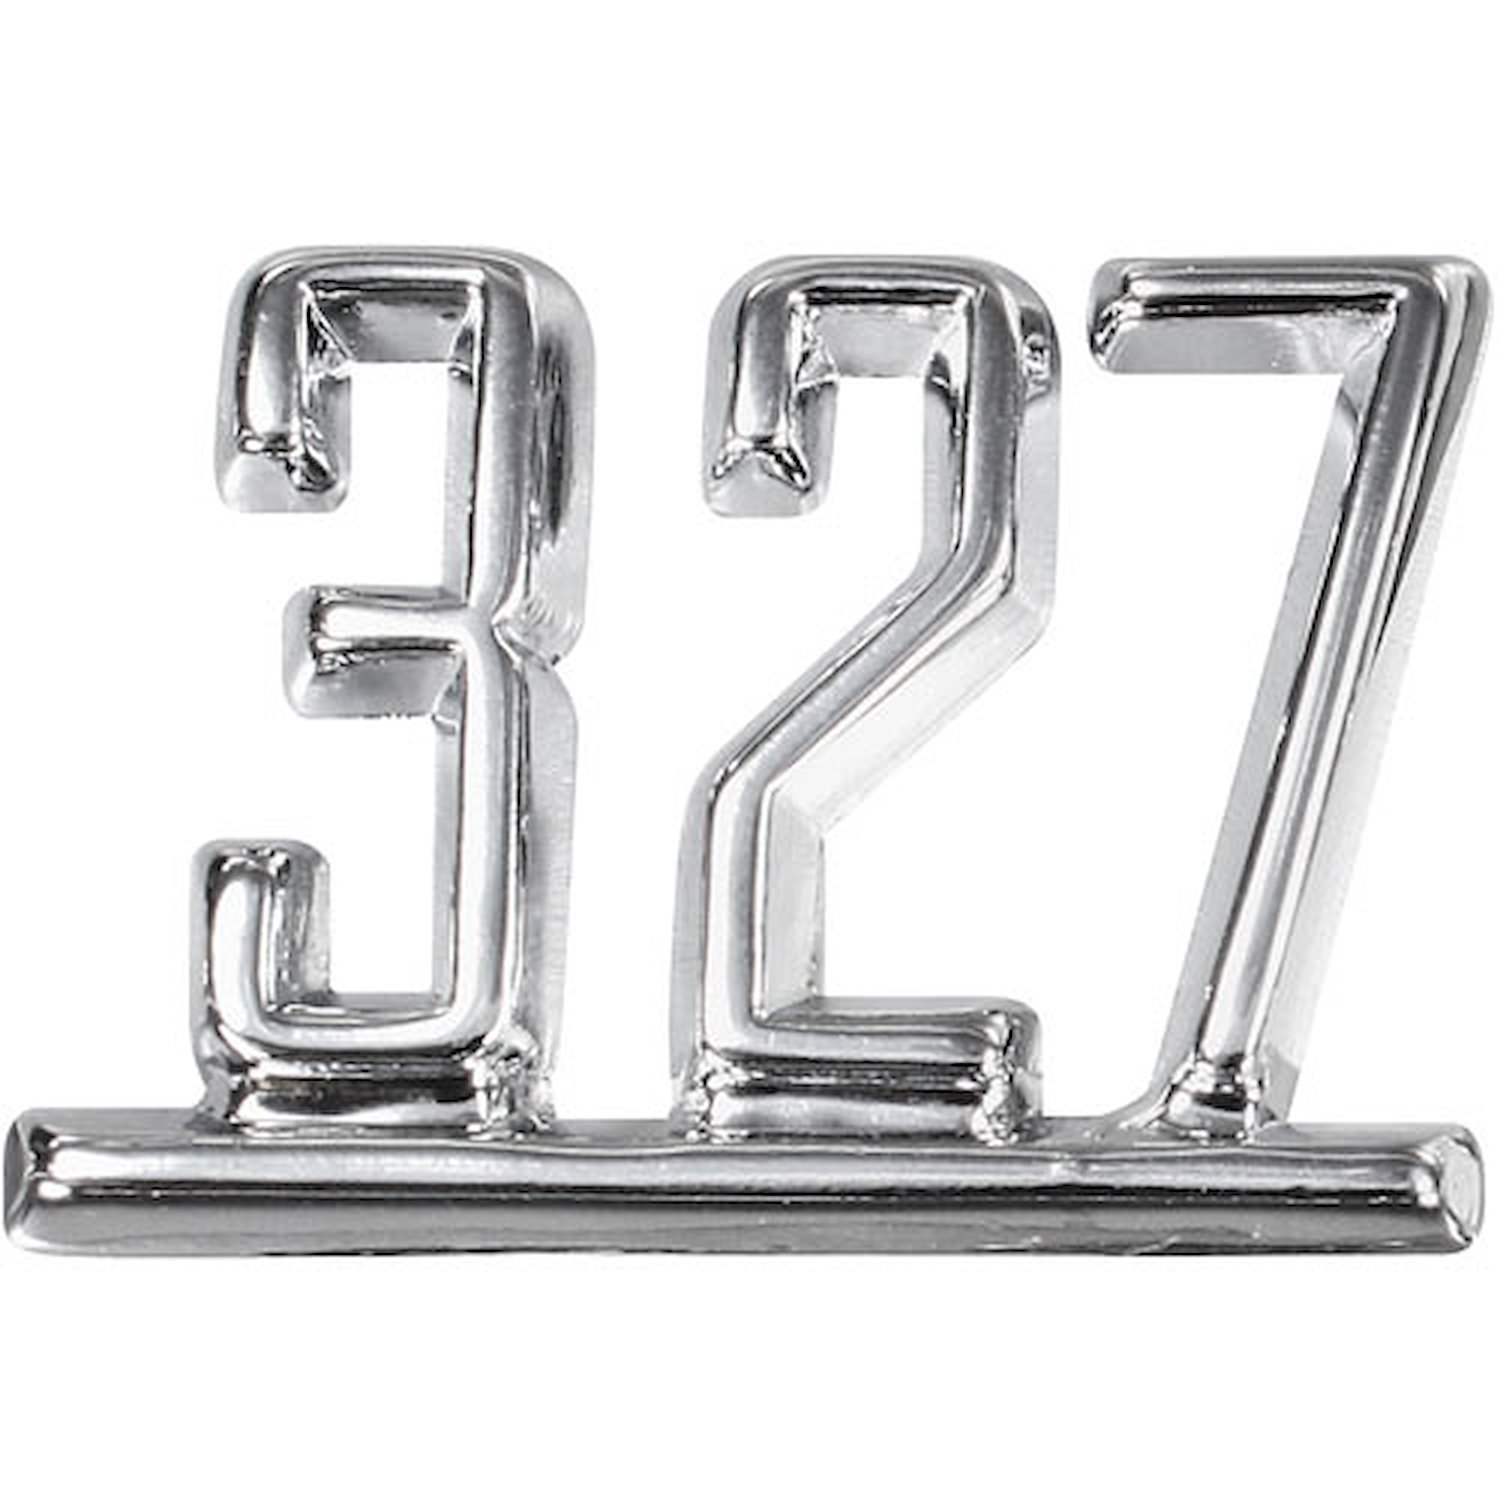 Fender Emblem for 1965-1967 Chevy Chevelle, El Camino with 327 [327 Numbers]